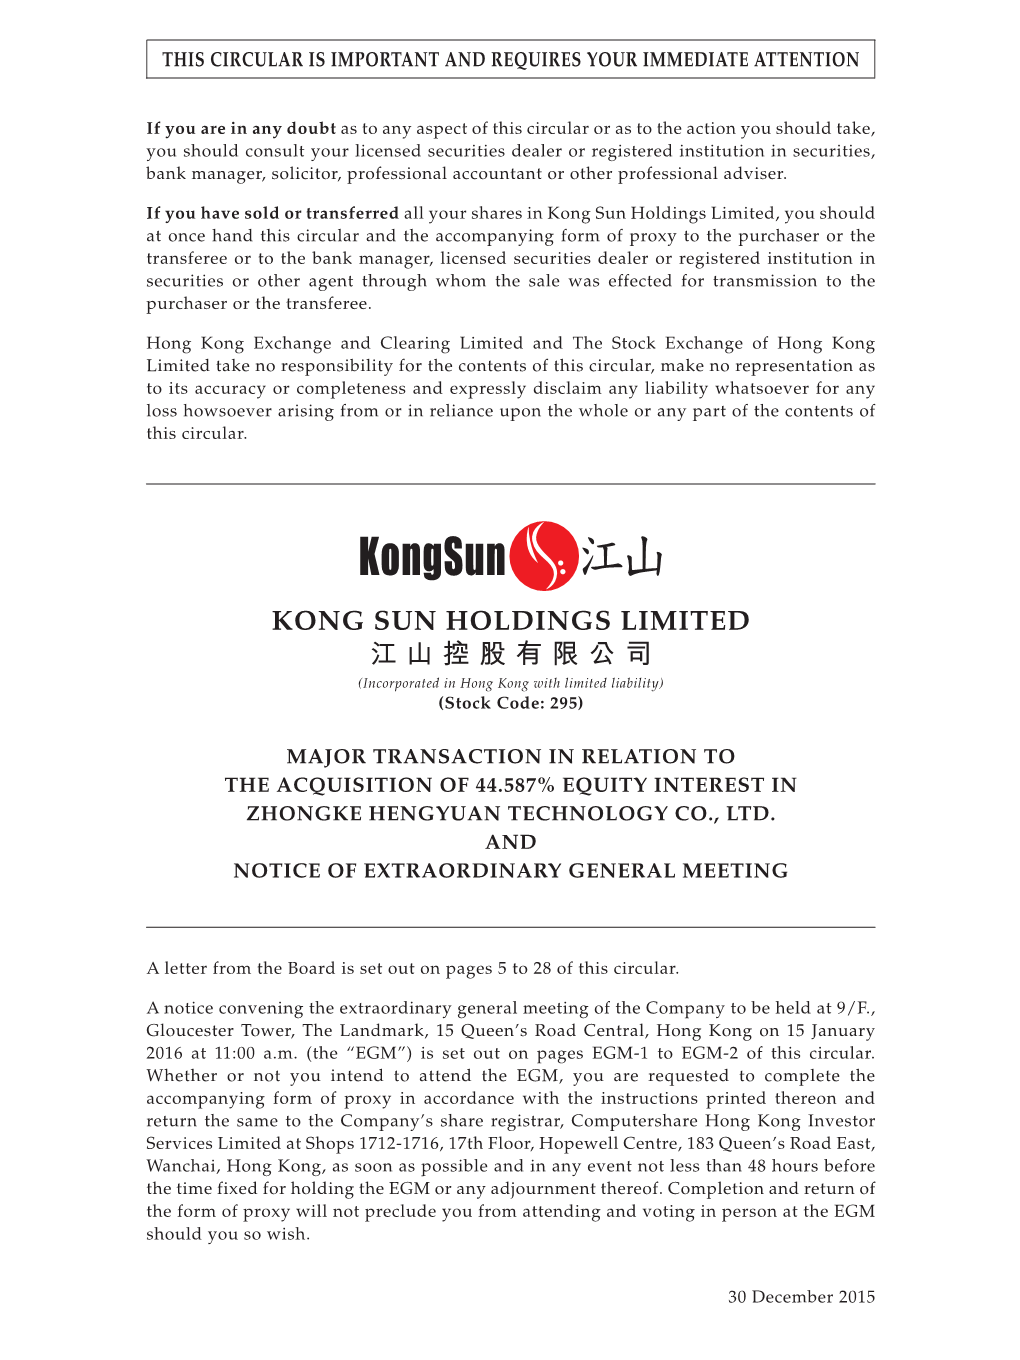 KONG SUN HOLDINGS LIMITED 江山控股有限公司 (Incorporated in Hong Kong with Limited Liability) (Stock Code: 295)